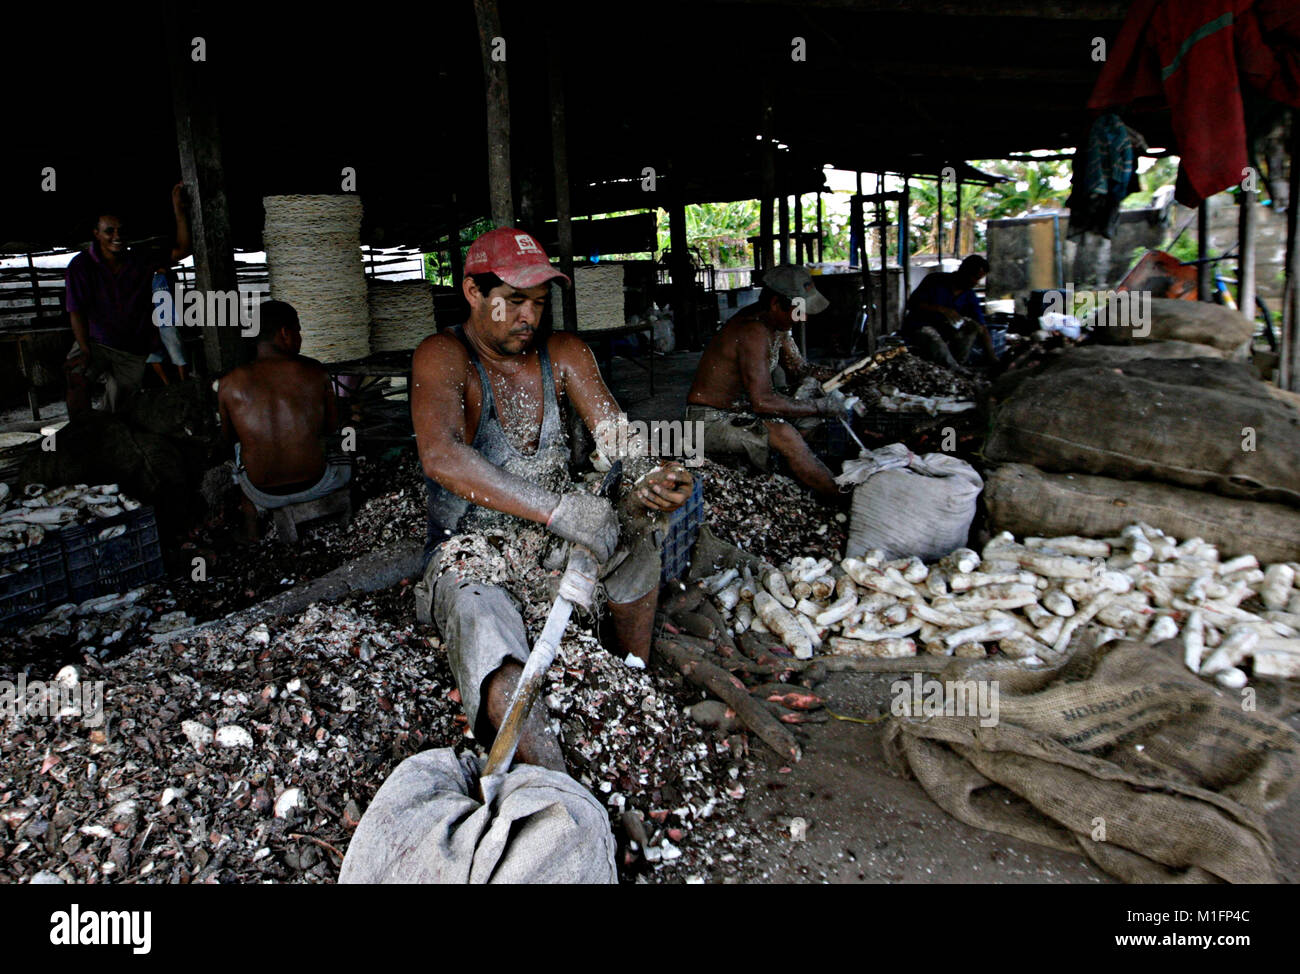 December 8, 2012 - Maturin, Monagas, Venezuela - december 09, 2012.A worker works in the peeling of the bitter yucca, to process it in the elaboration of the casabe. The casabe or cazabe is part of the tradition of the Venezuelan as its indigenous people elaborated it and it is known as the Venezuelan bread. In the city of Maturâ€™n, Monagas state. Venezuela .foto: Juan Carlos Hernandez (Credit Image: © Juan Carlos Hernandez via ZUMA Wire) Stock Photo